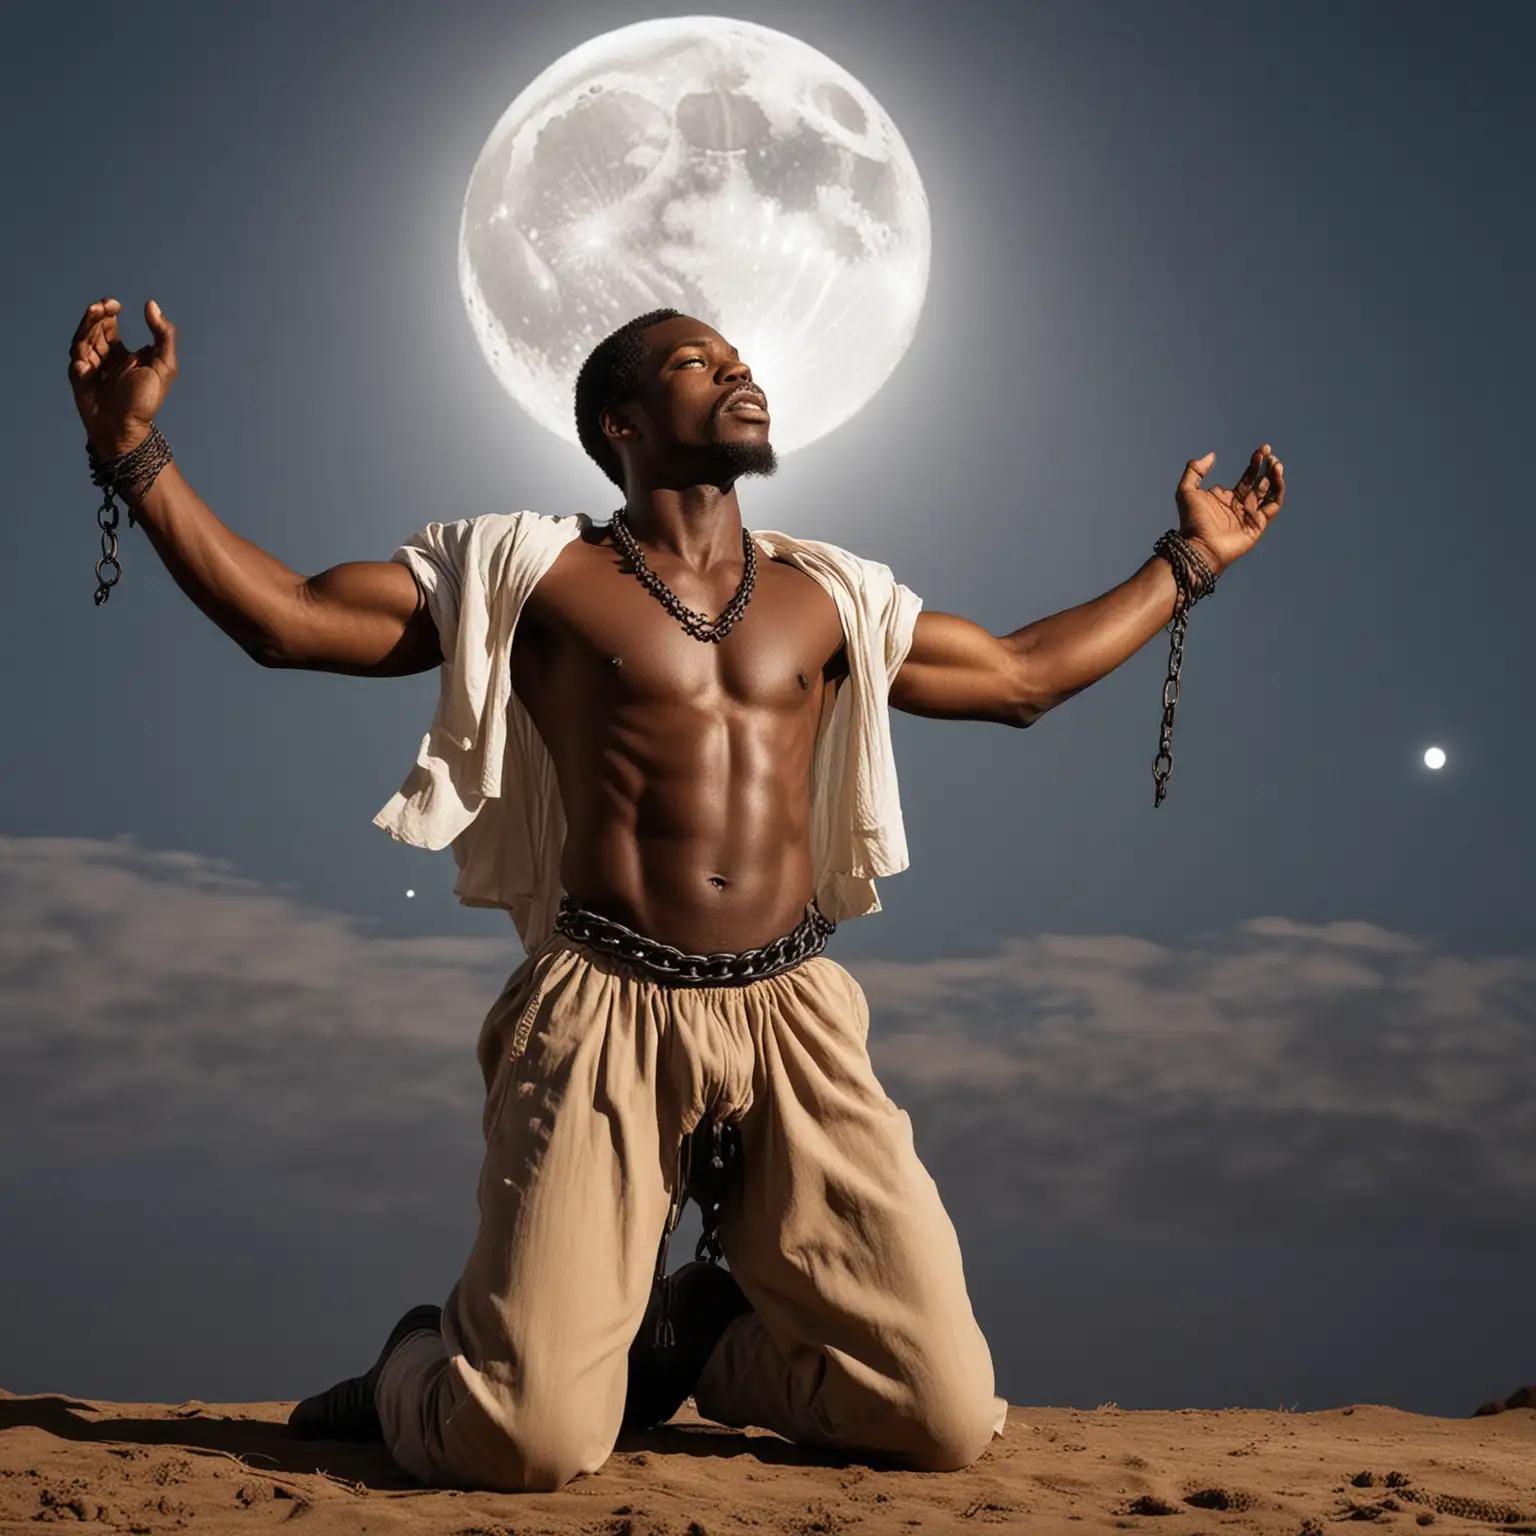 Create a image of Black male slave in the 1800s half dressed on his knees, looking  up with arms spread to sky with broken chains around his hands giving  praise with moon shining light from sky on his body down on Juneteenth night, celebrating his freedom and acknowledgment of his ancestors.